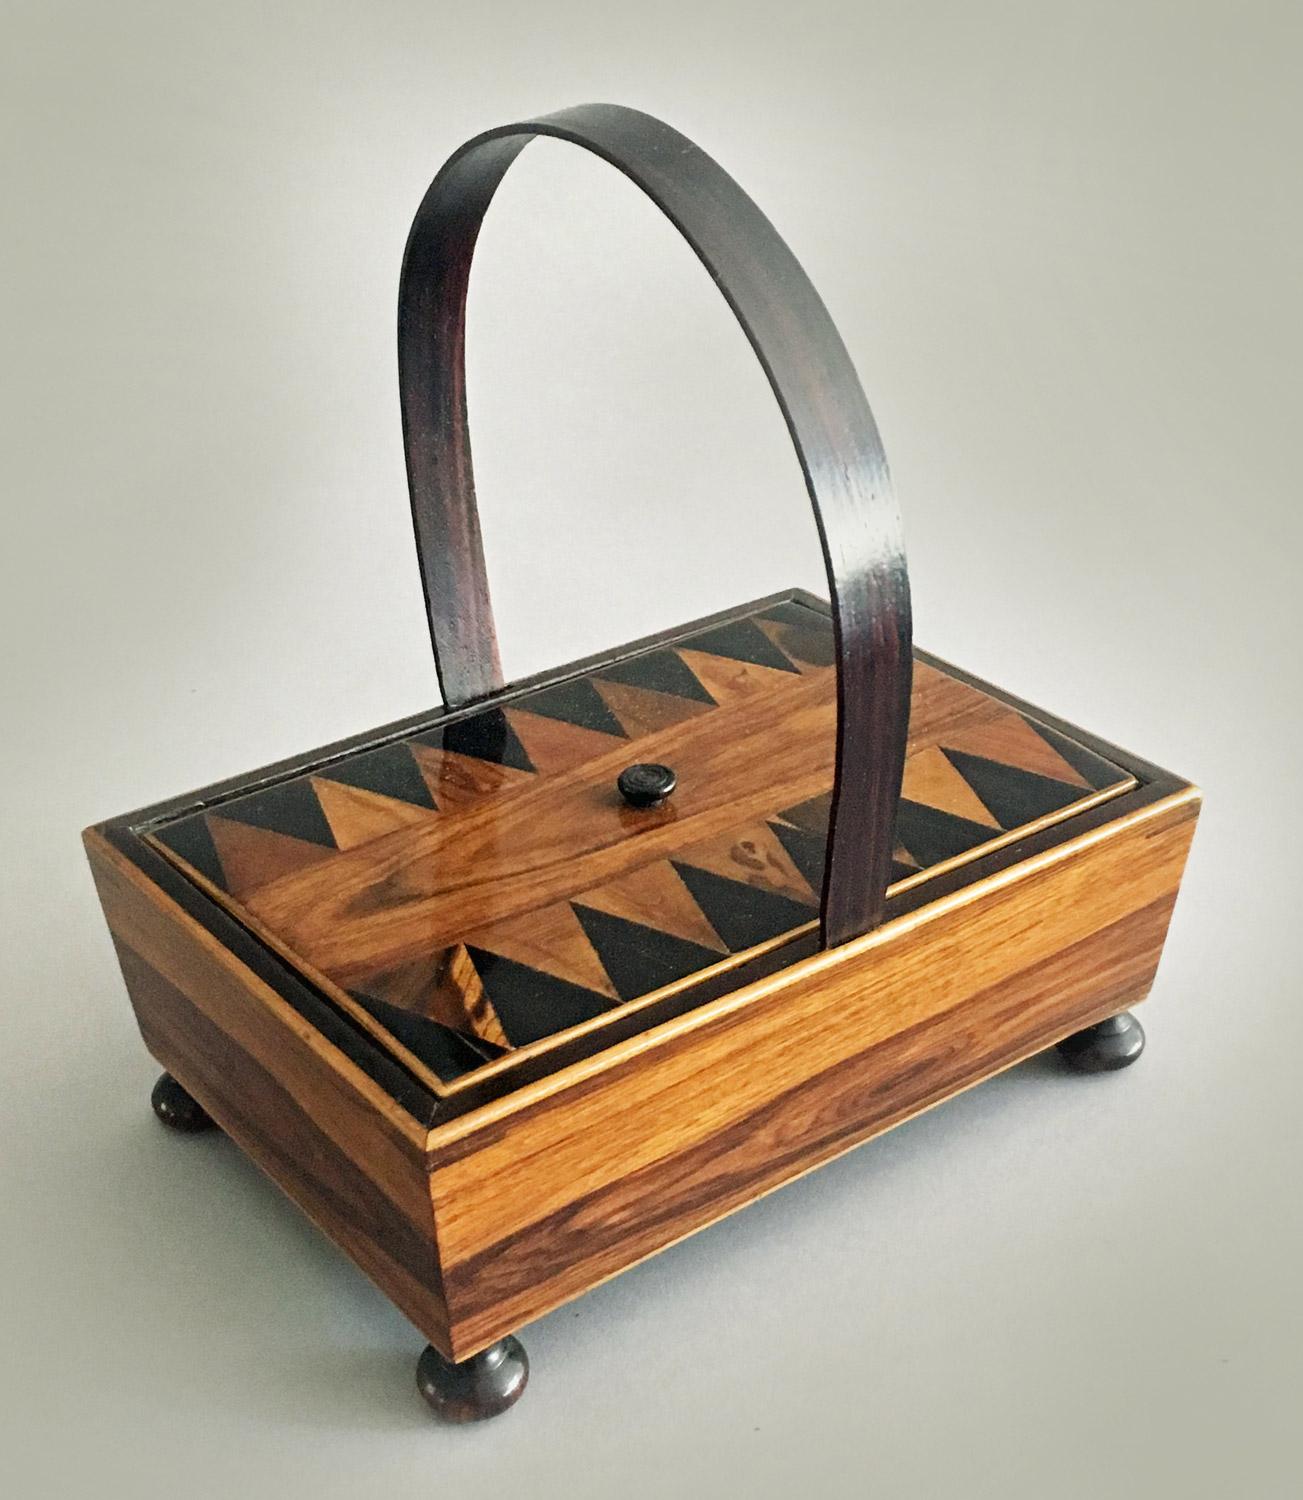 A rare early 19th century Tunbridgeware rosewood sewing box with hoop handle, the lid with tiny carved knob is decorated in the striking Van Dyke pattern, the sides in bold rosewood veneers, mounted on turned turnip shaped feet. When the lid is